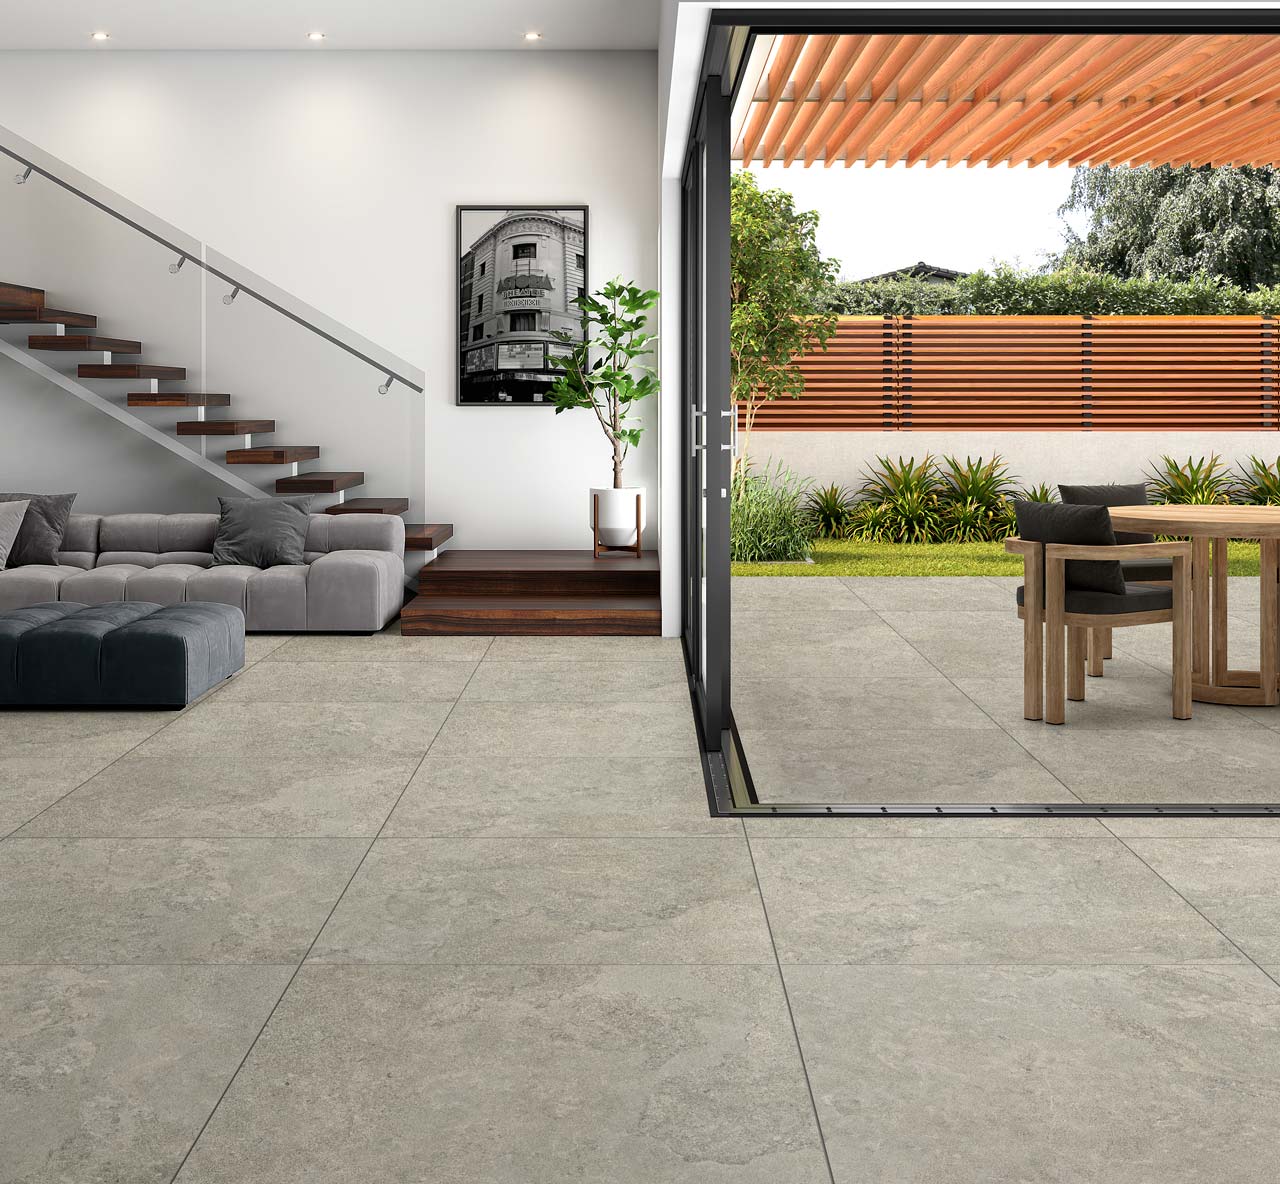 Valverdi Astoria stone effect Outdoor Tiles used on a modern stone patio area with matching grey stone effect indoor tiles